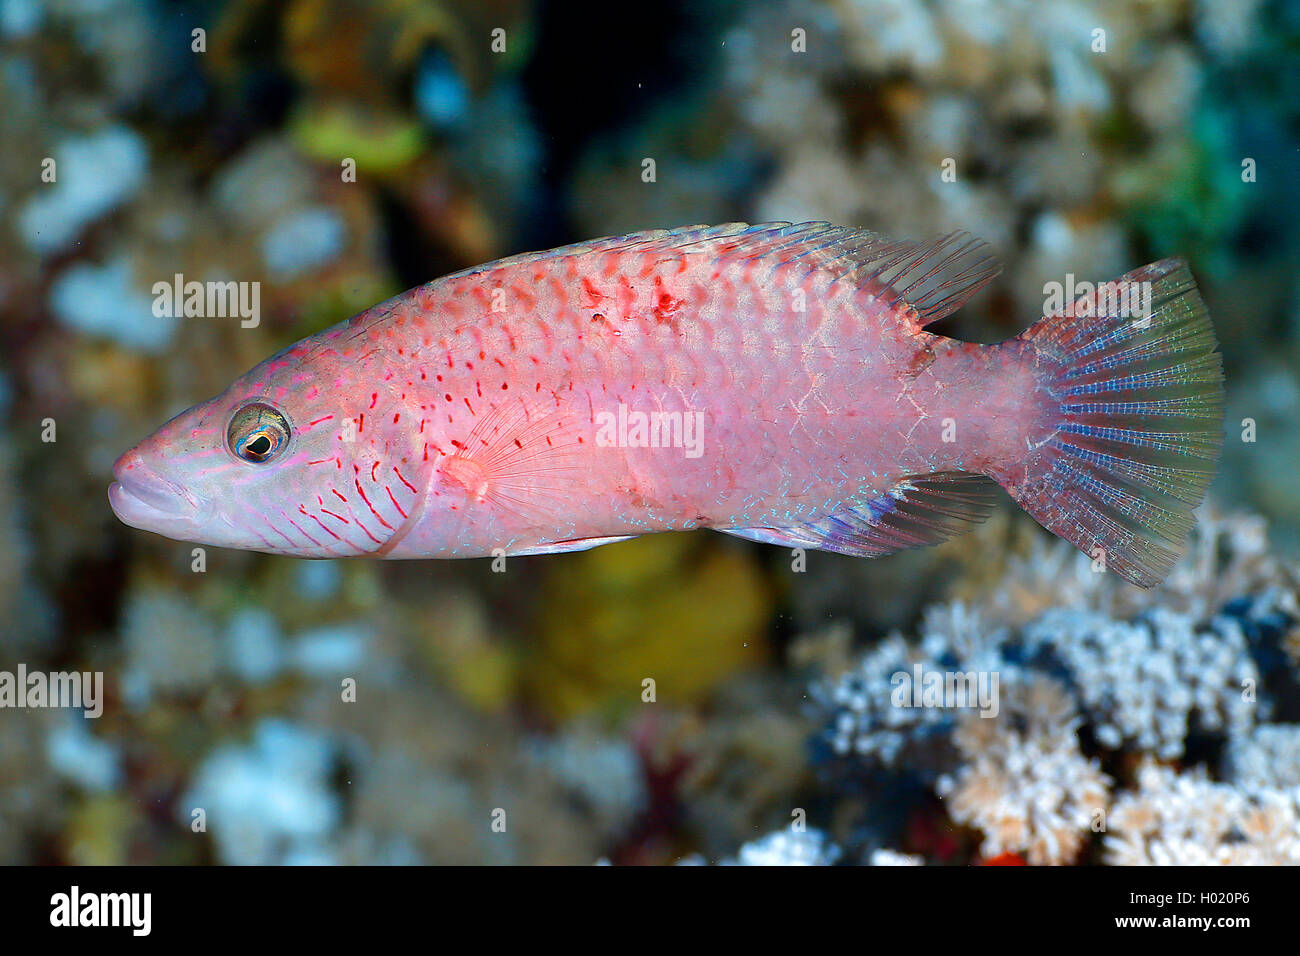 Cheek-lined wrasse (Oxycheilinus digrammus), at coral reef, Egypt, Red Sea Stock Photo